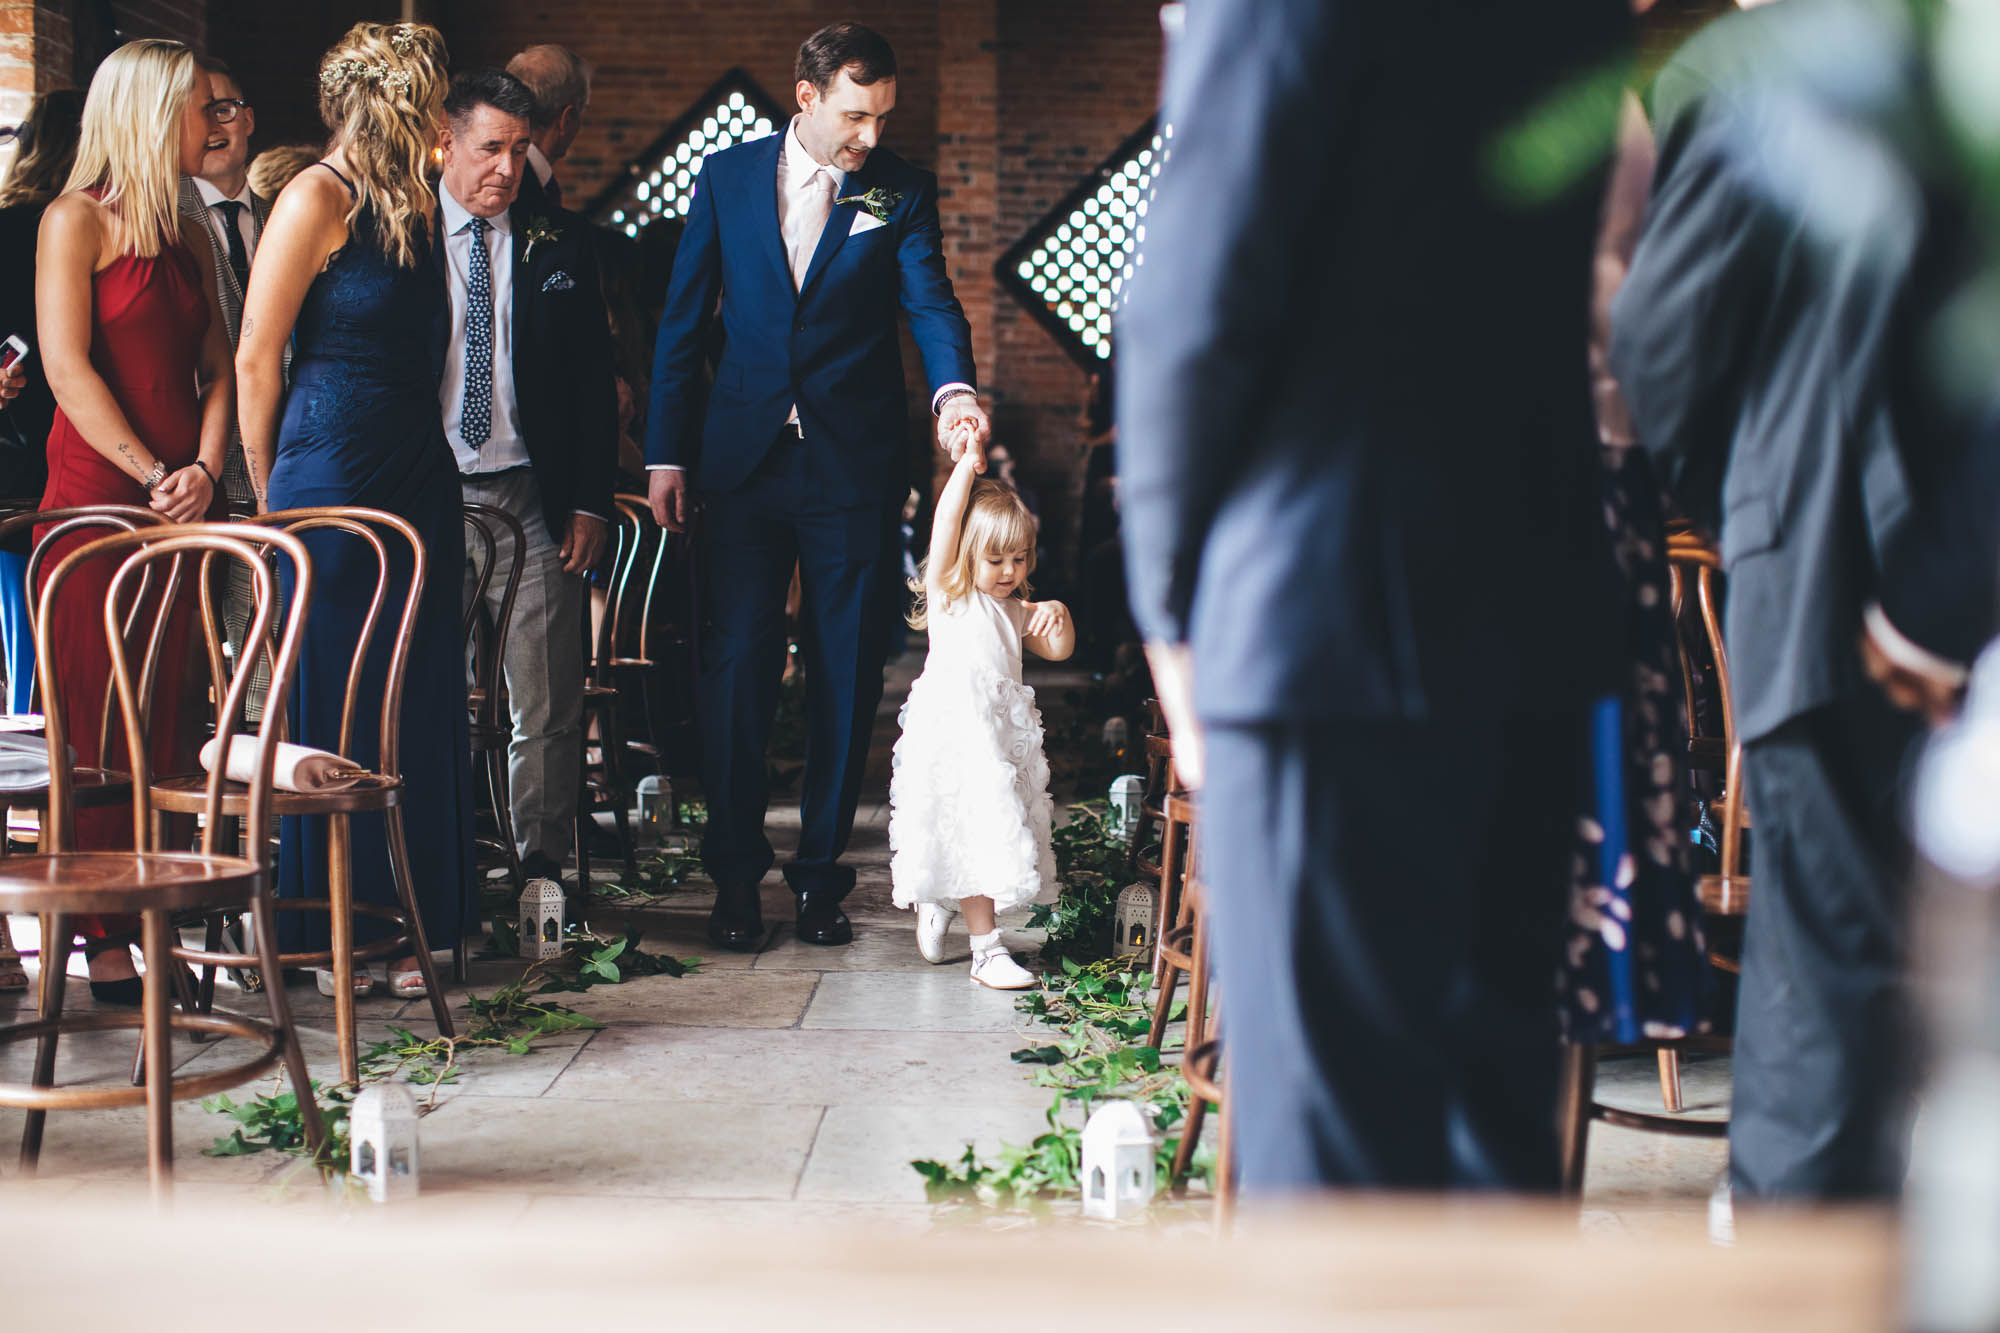 Wedding guest leads young girl down the aisle and wedding guests look on from their seats